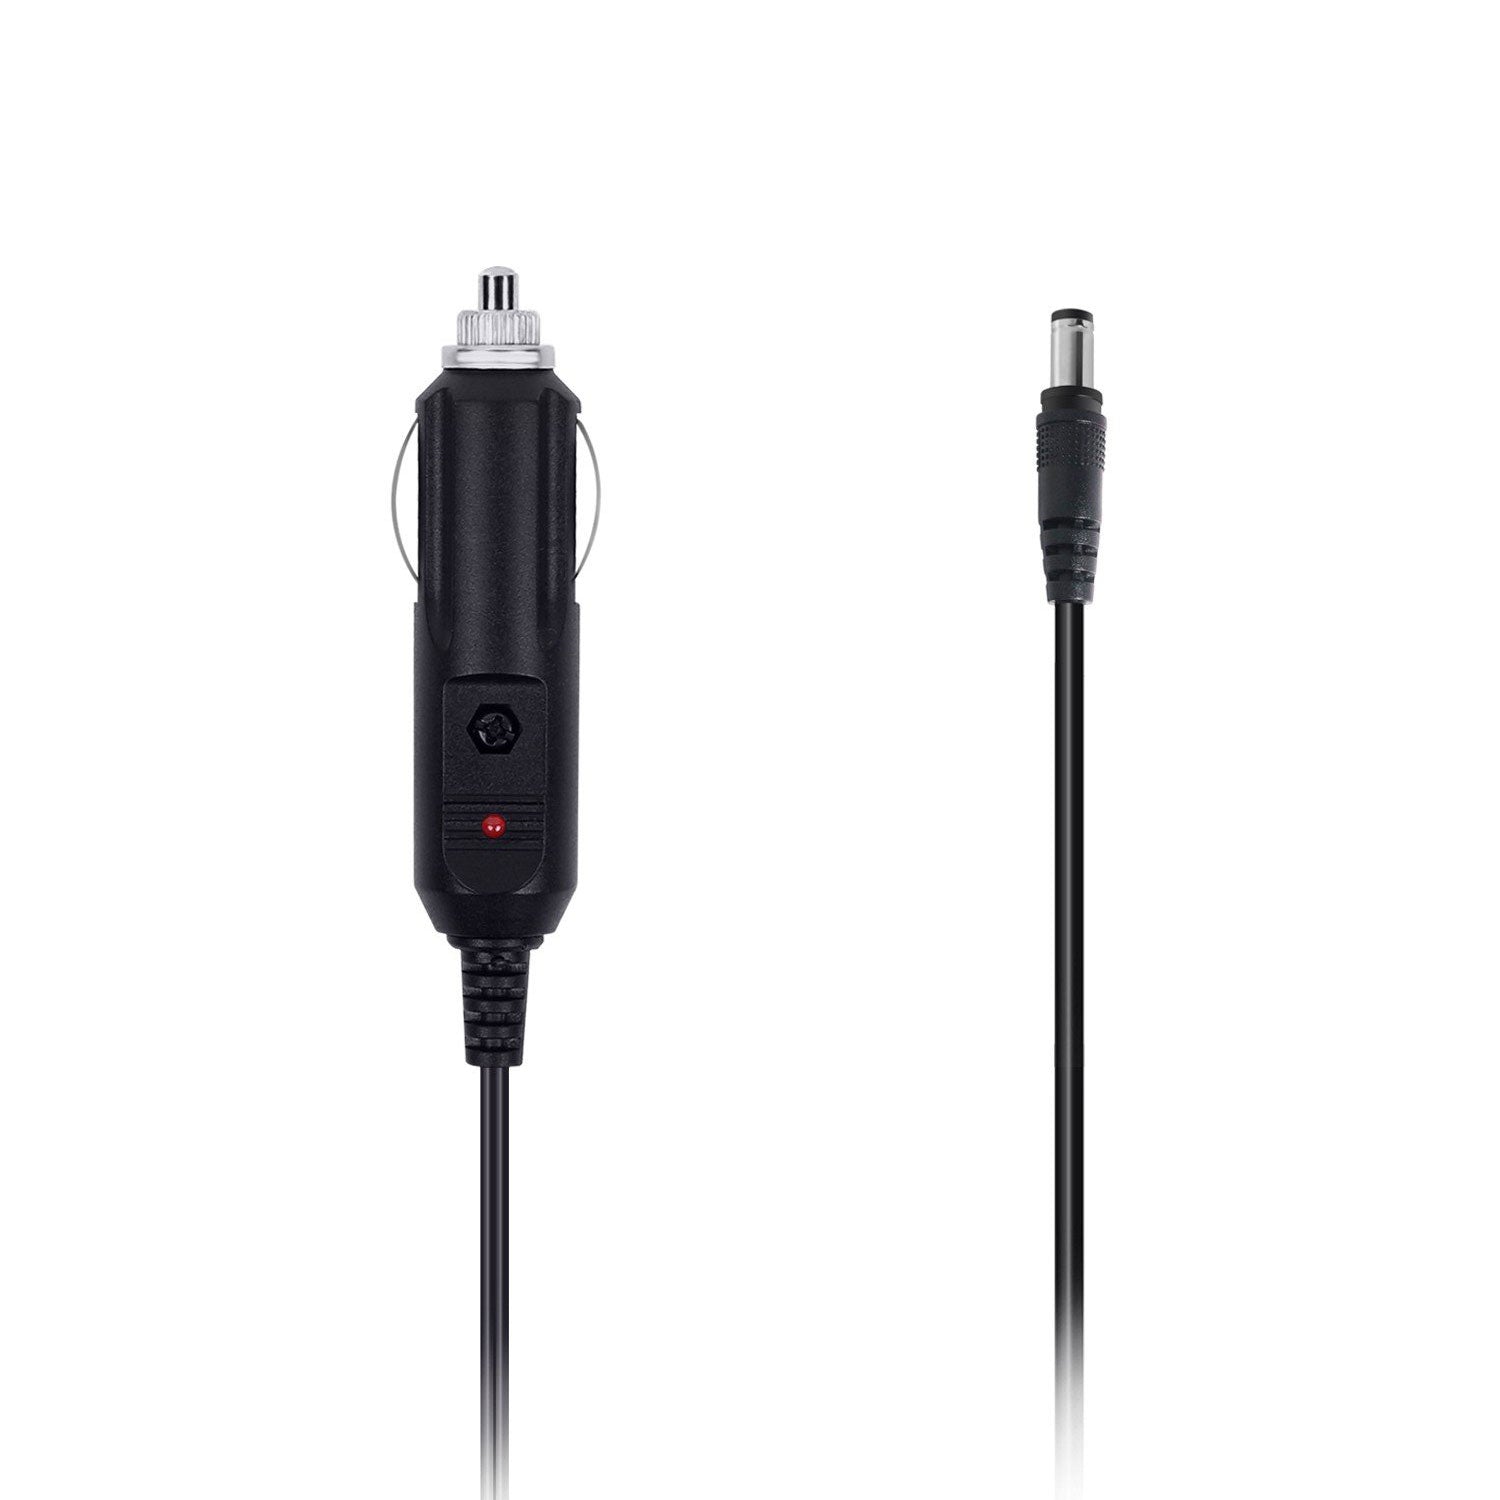 Car Charger for Comfier Car seat cushion